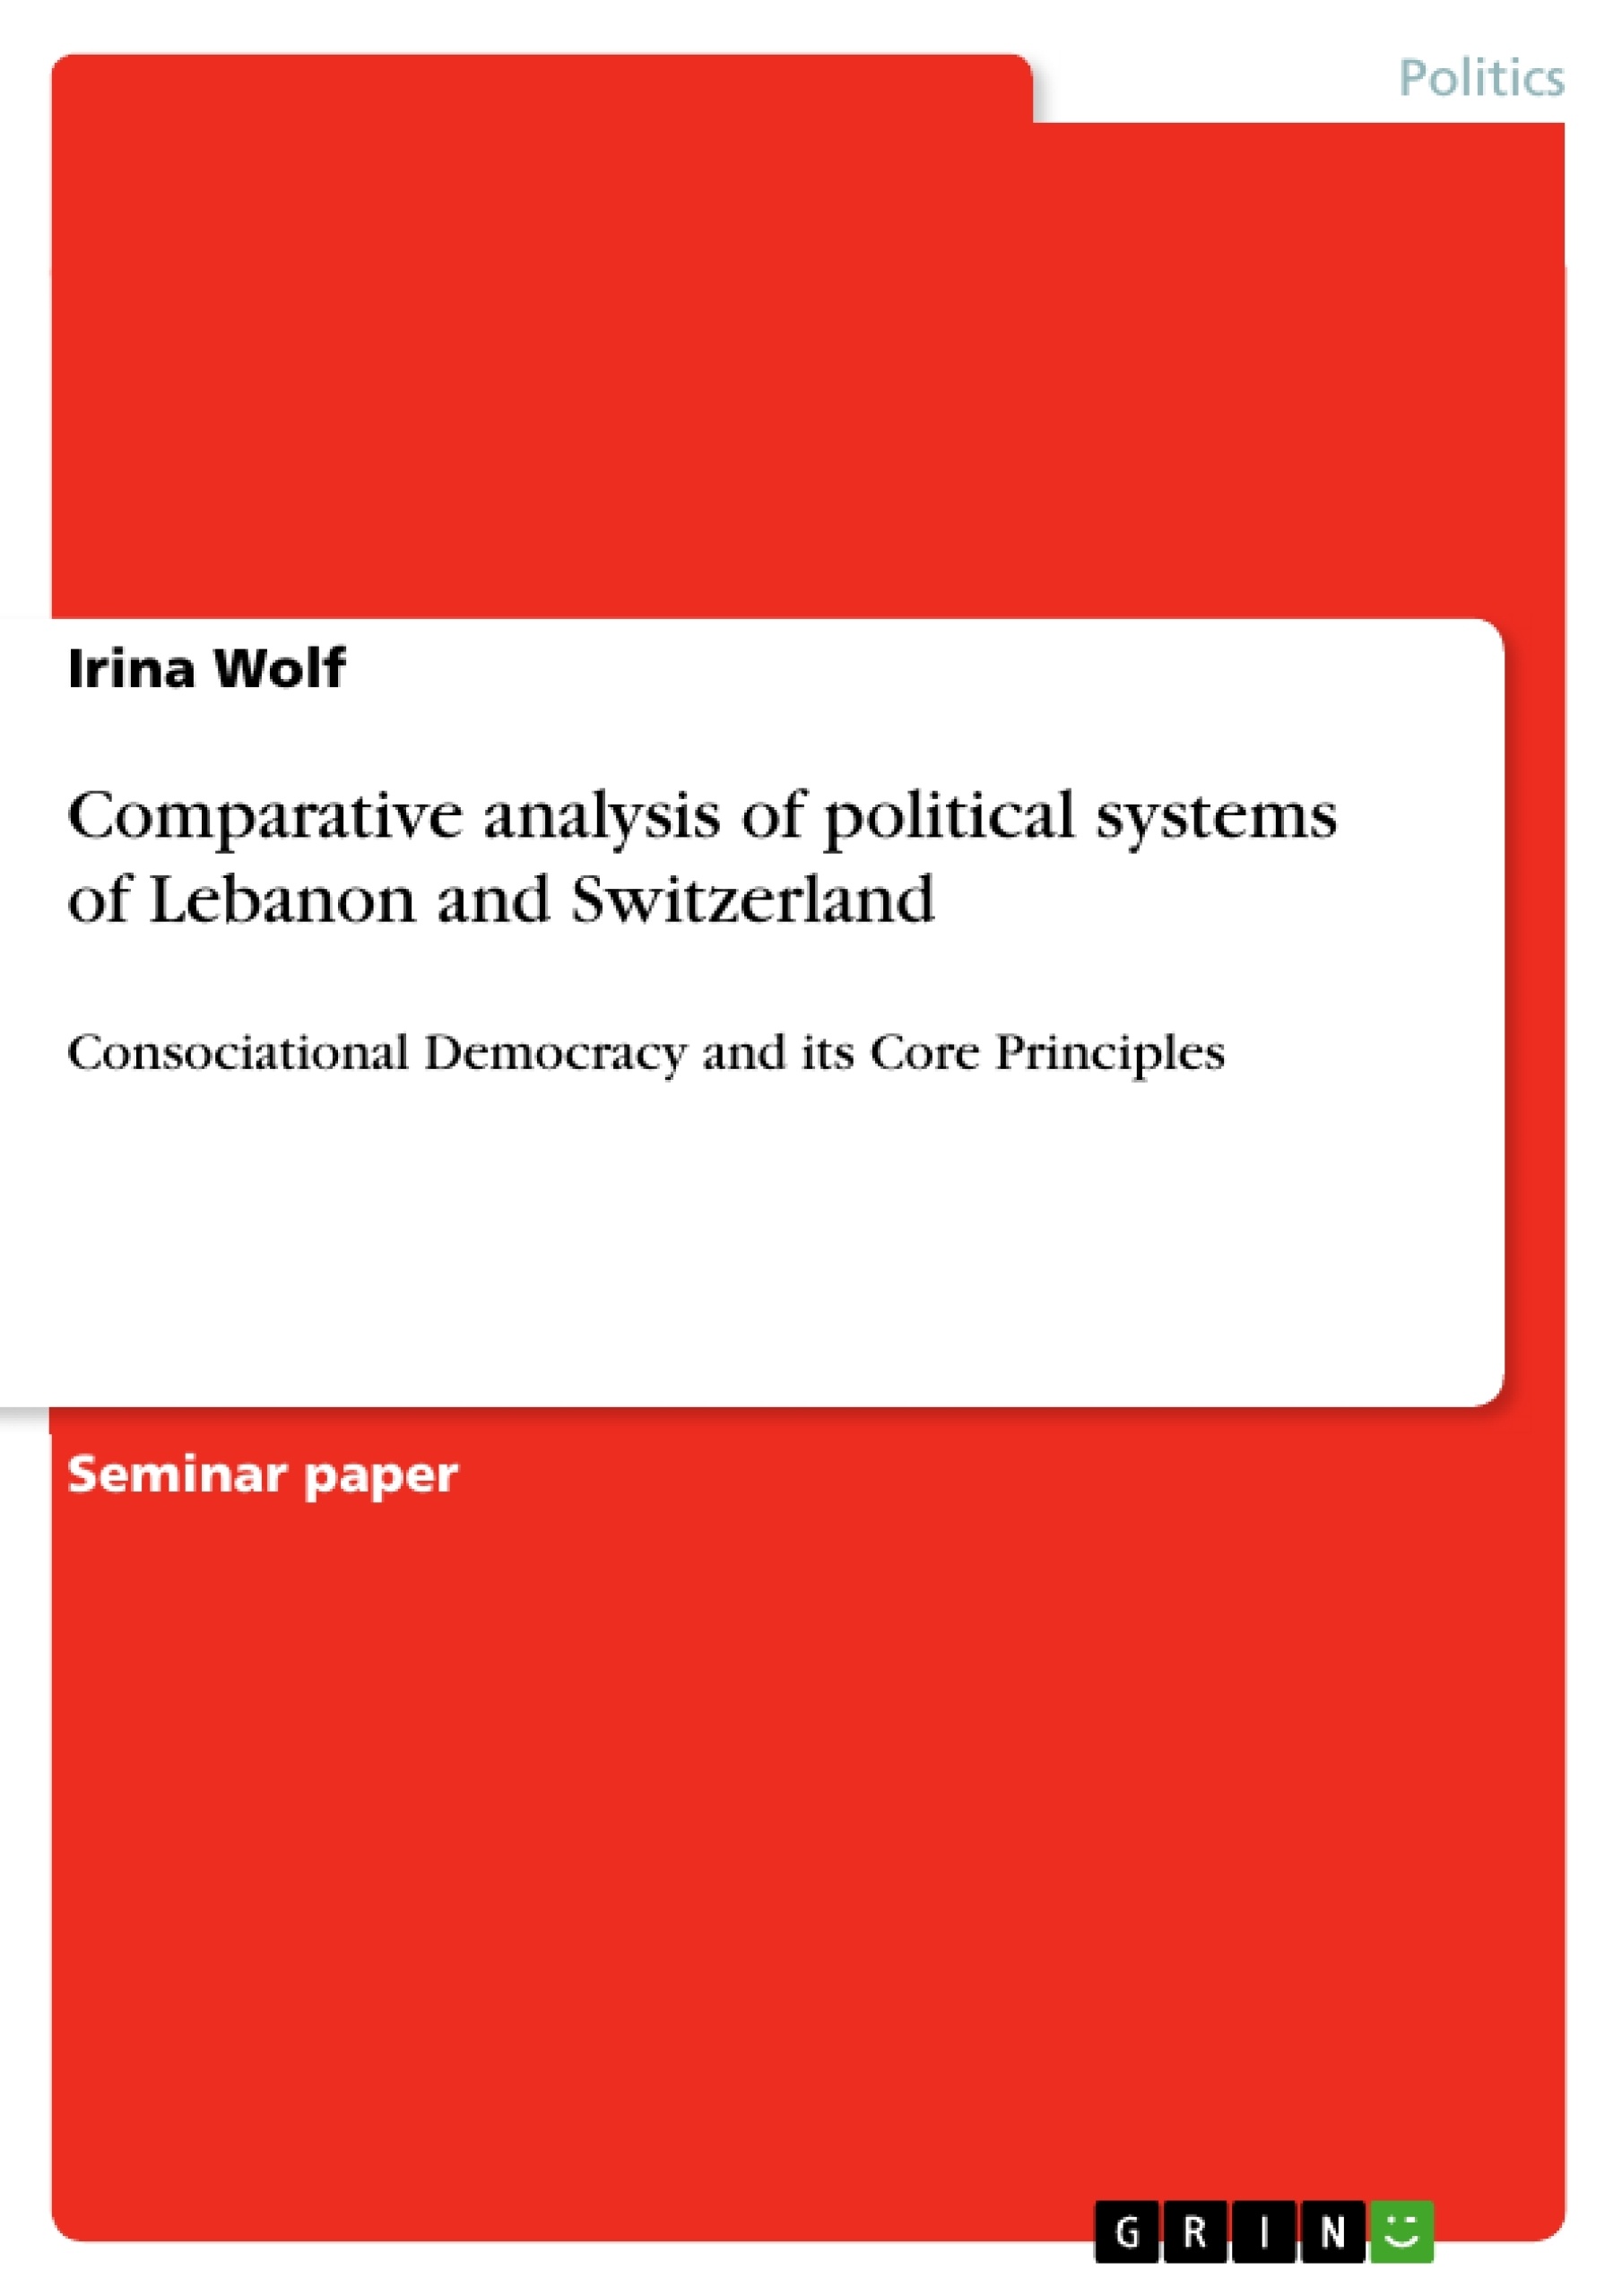 Título: Comparative analysis of political systems of Lebanon and Switzerland